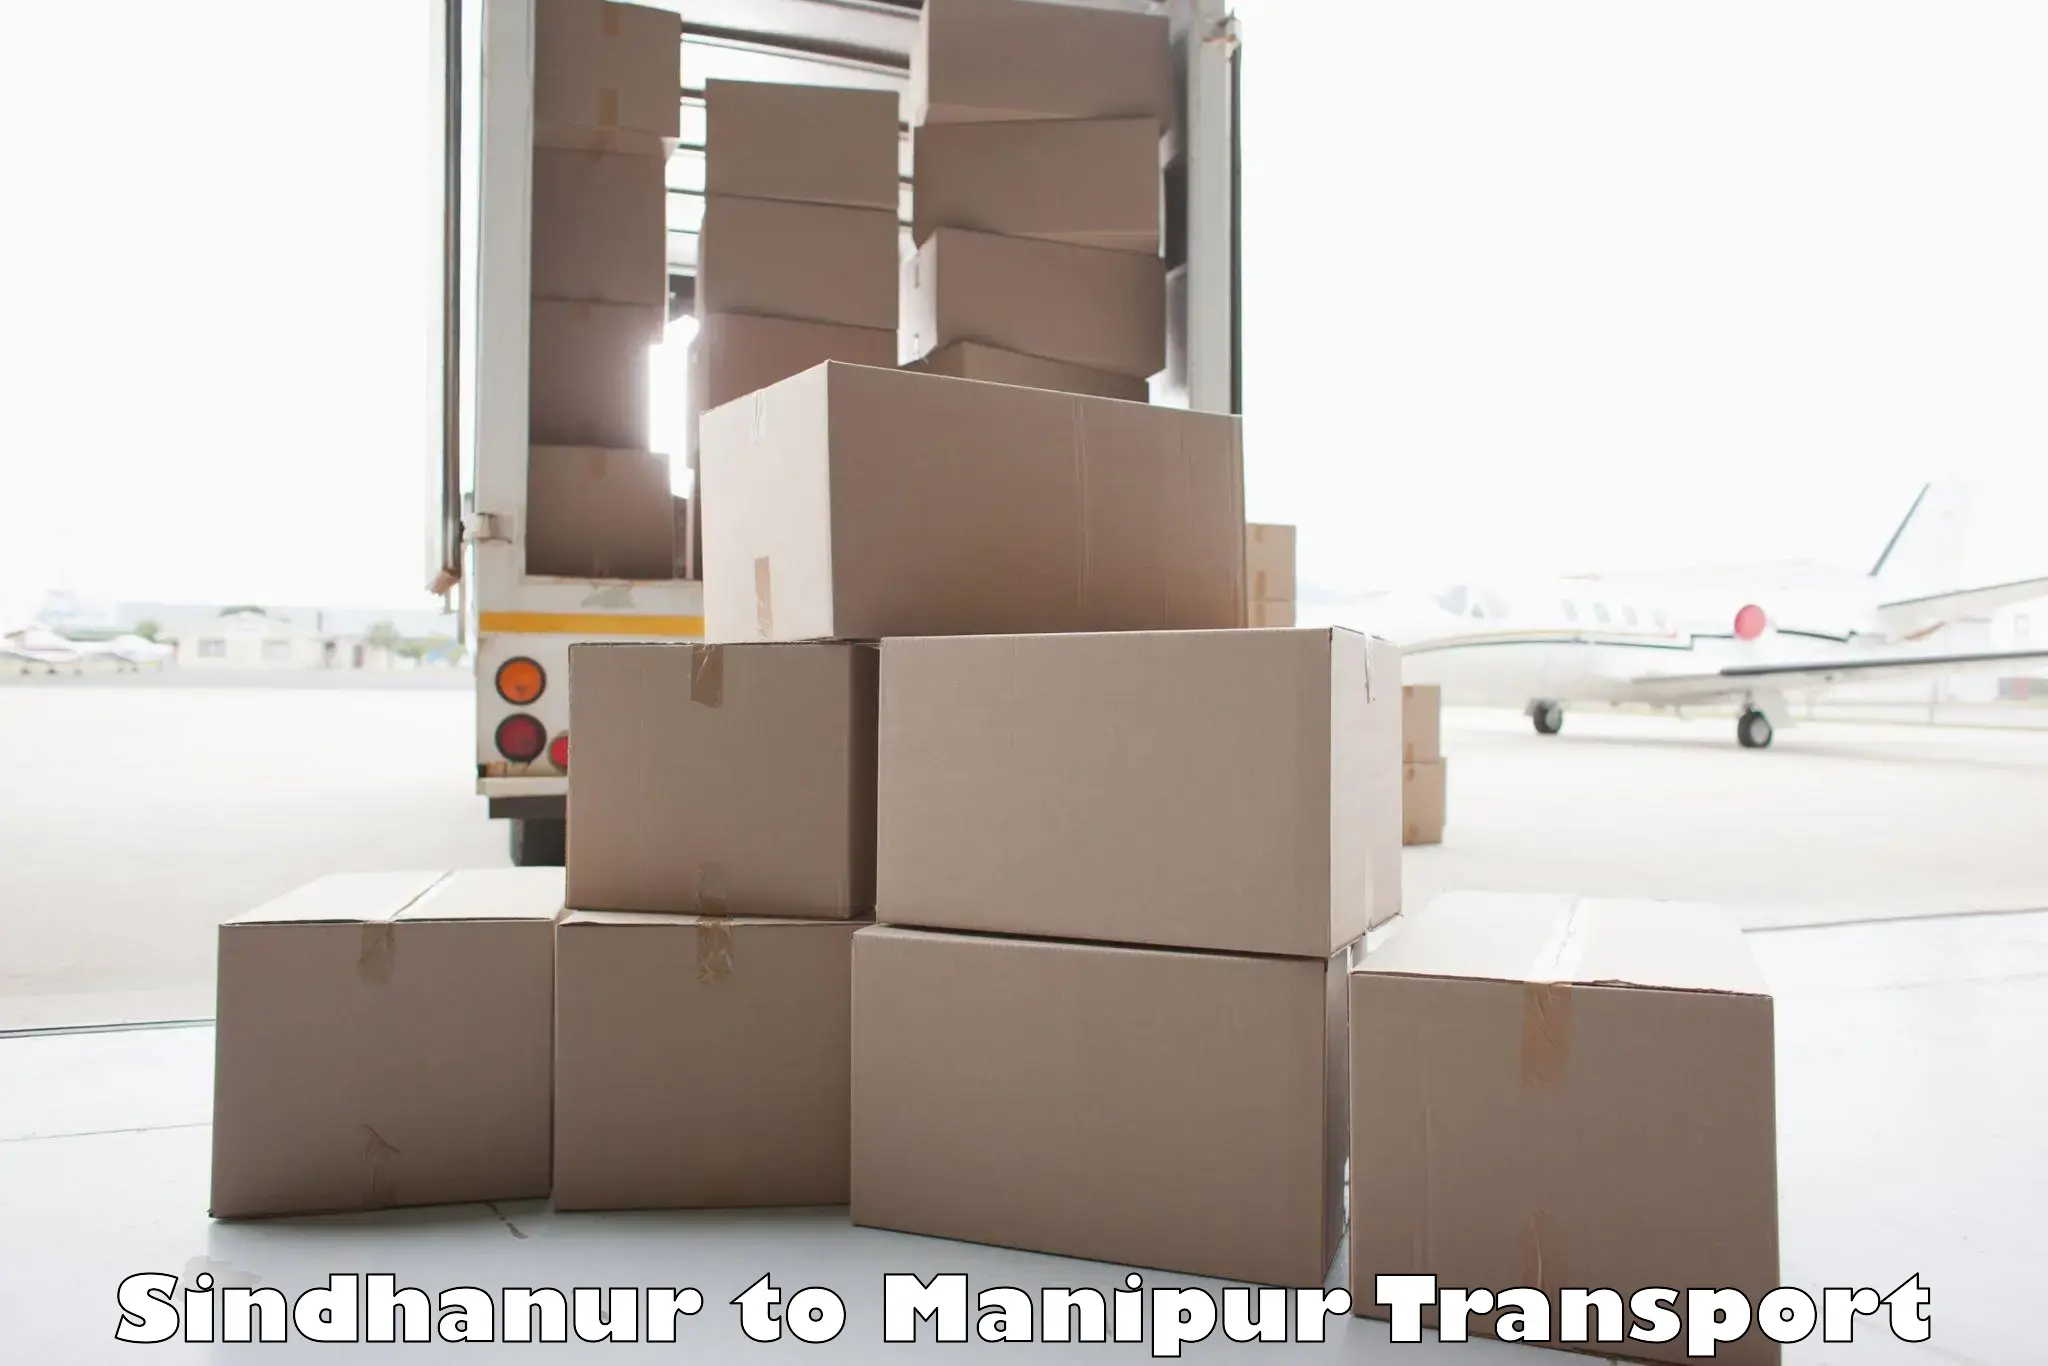 Transport bike from one state to another Sindhanur to Manipur